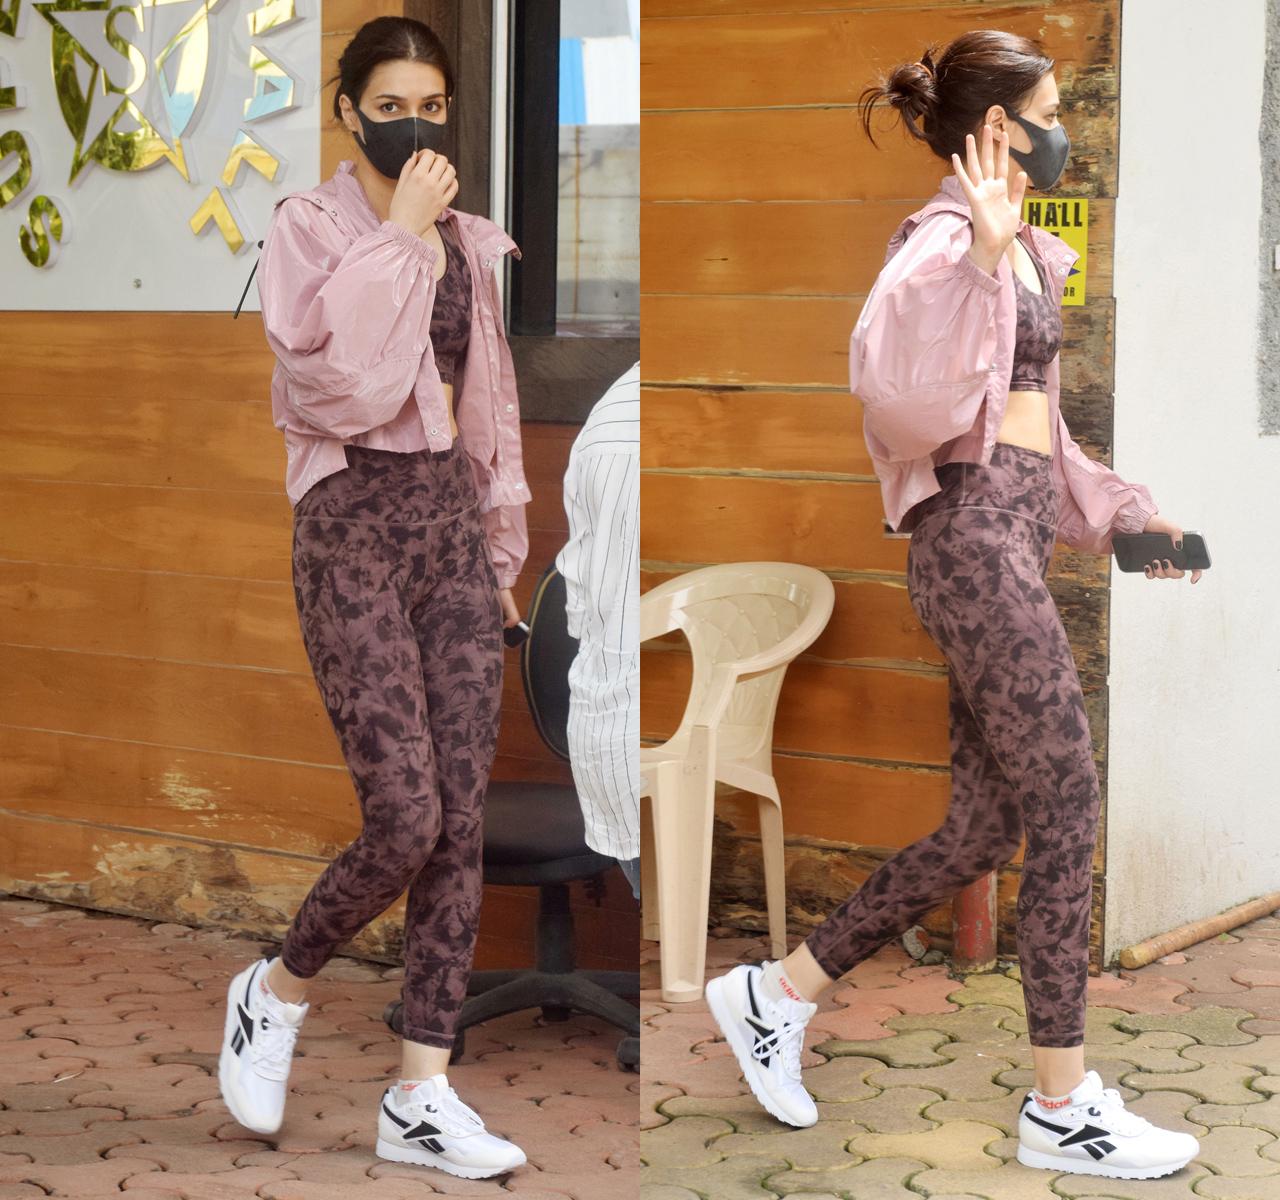 Kriti Sanon was snapped outside her dance class in Andheri, Mumbai. Kriti sizzled in a mauve printed bralette and leggings with a pink jacket thrown over. The actress was heading home, after attending the dance classes.